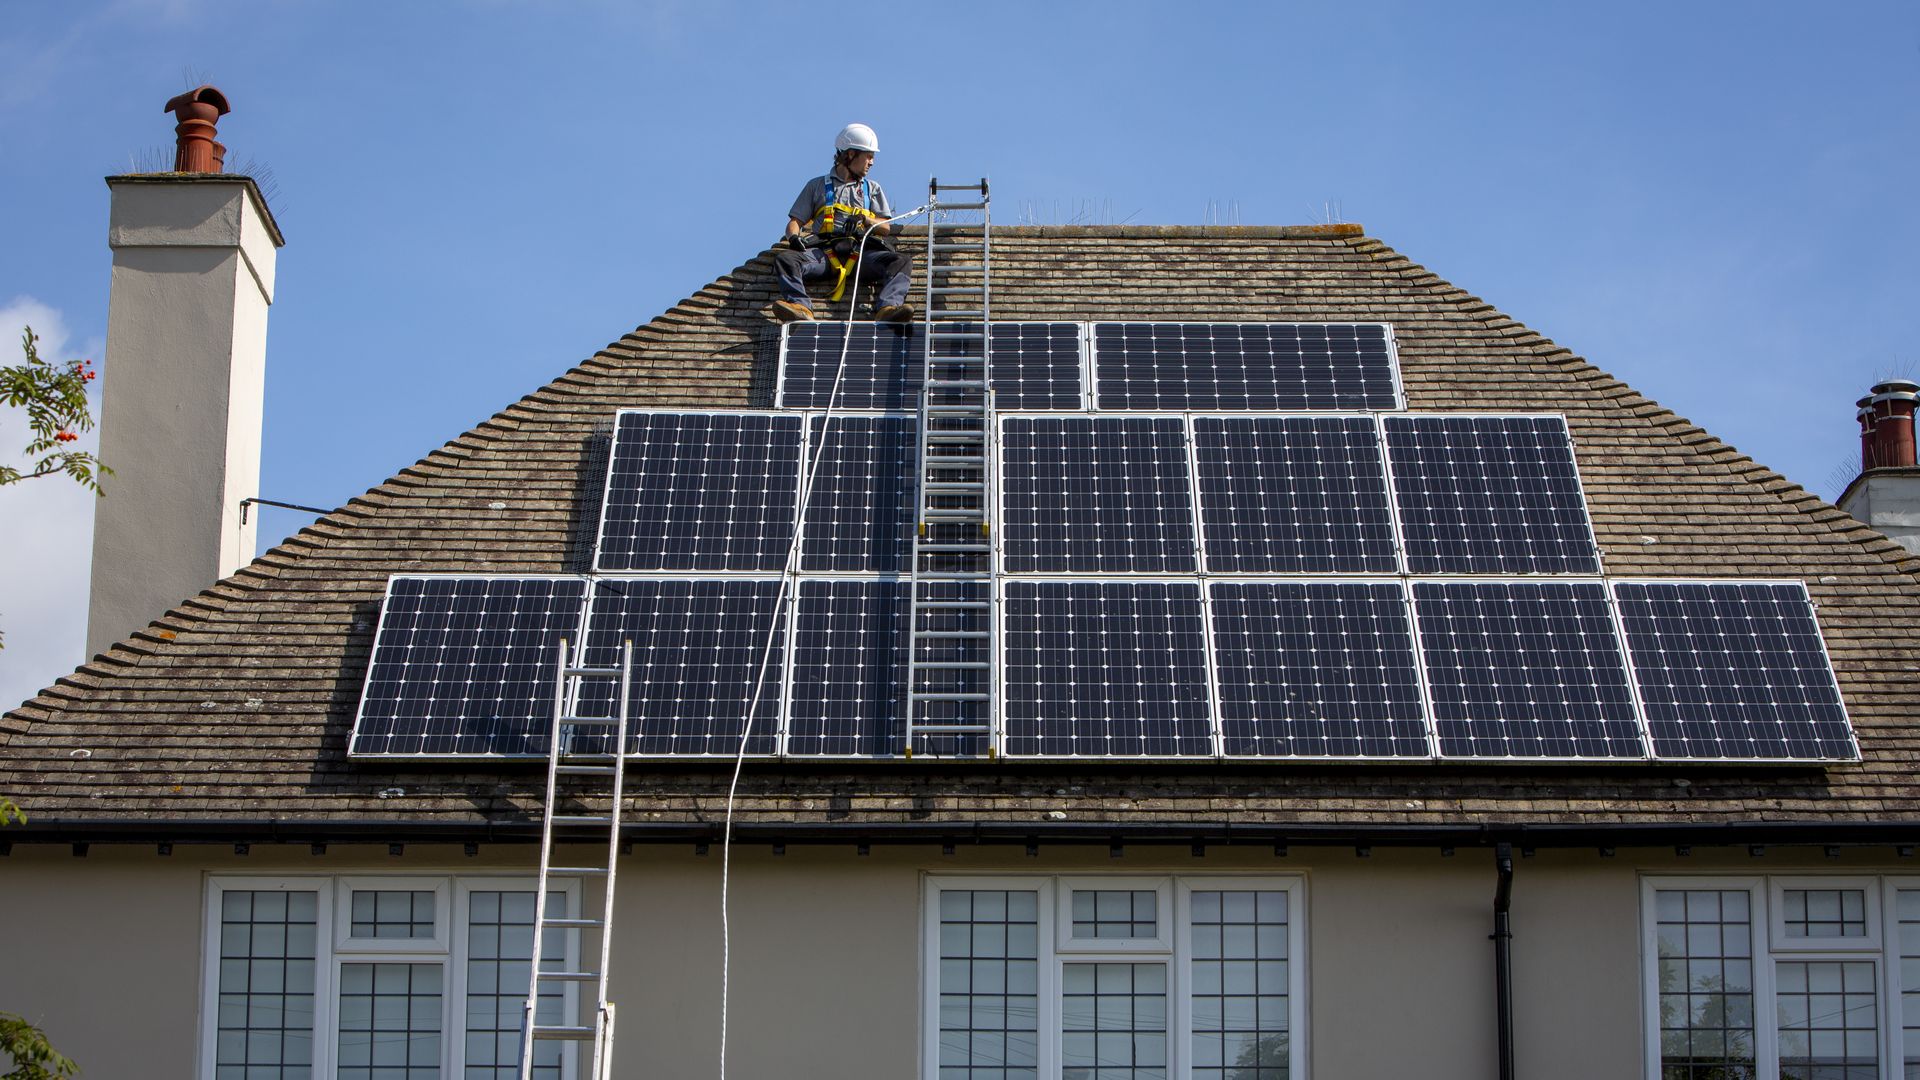 A man on a roof installing a solar panel.